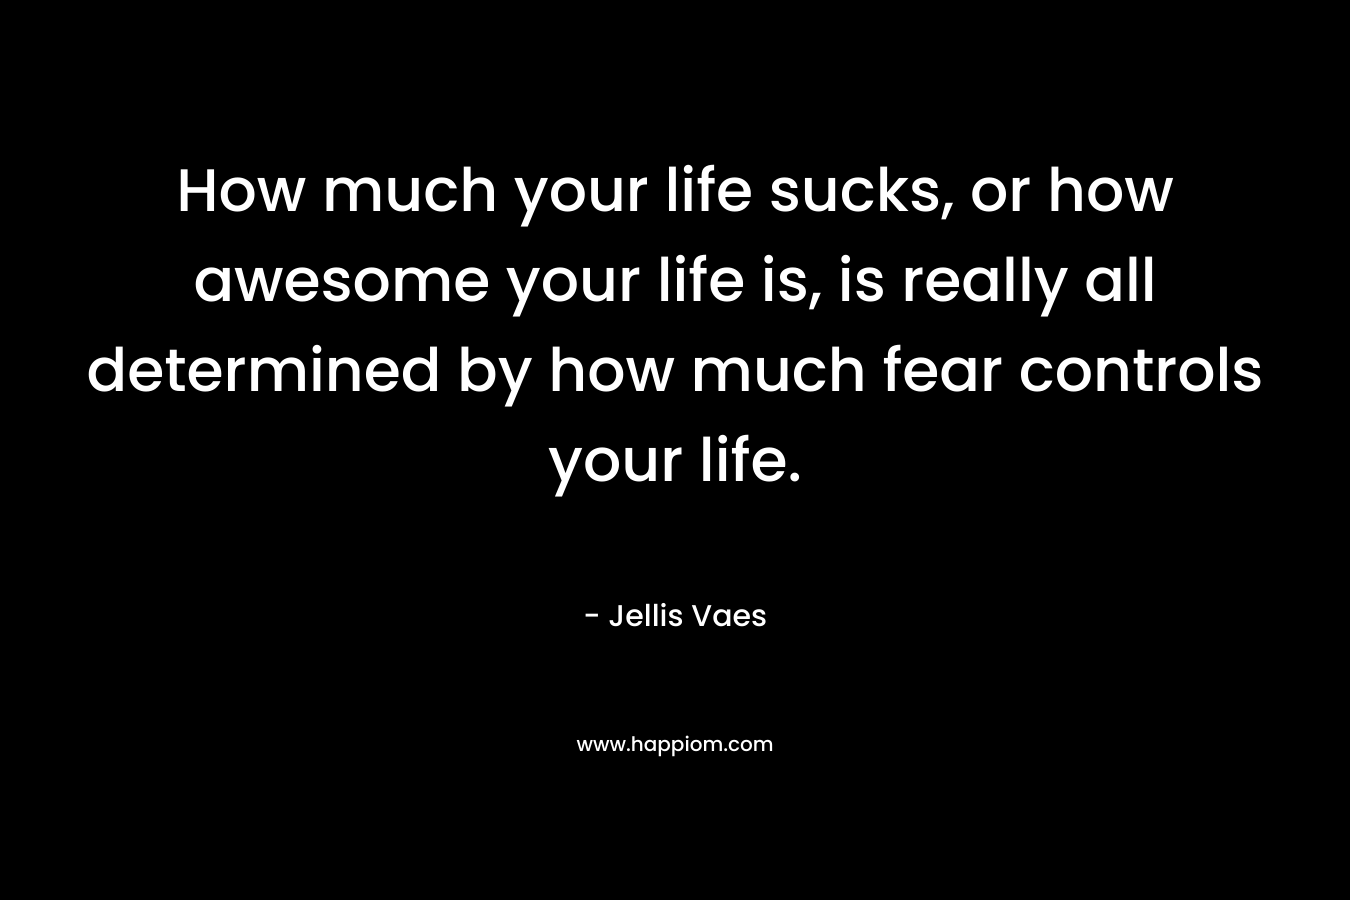 How much your life sucks, or how awesome your life is, is really all determined by how much fear controls your life.